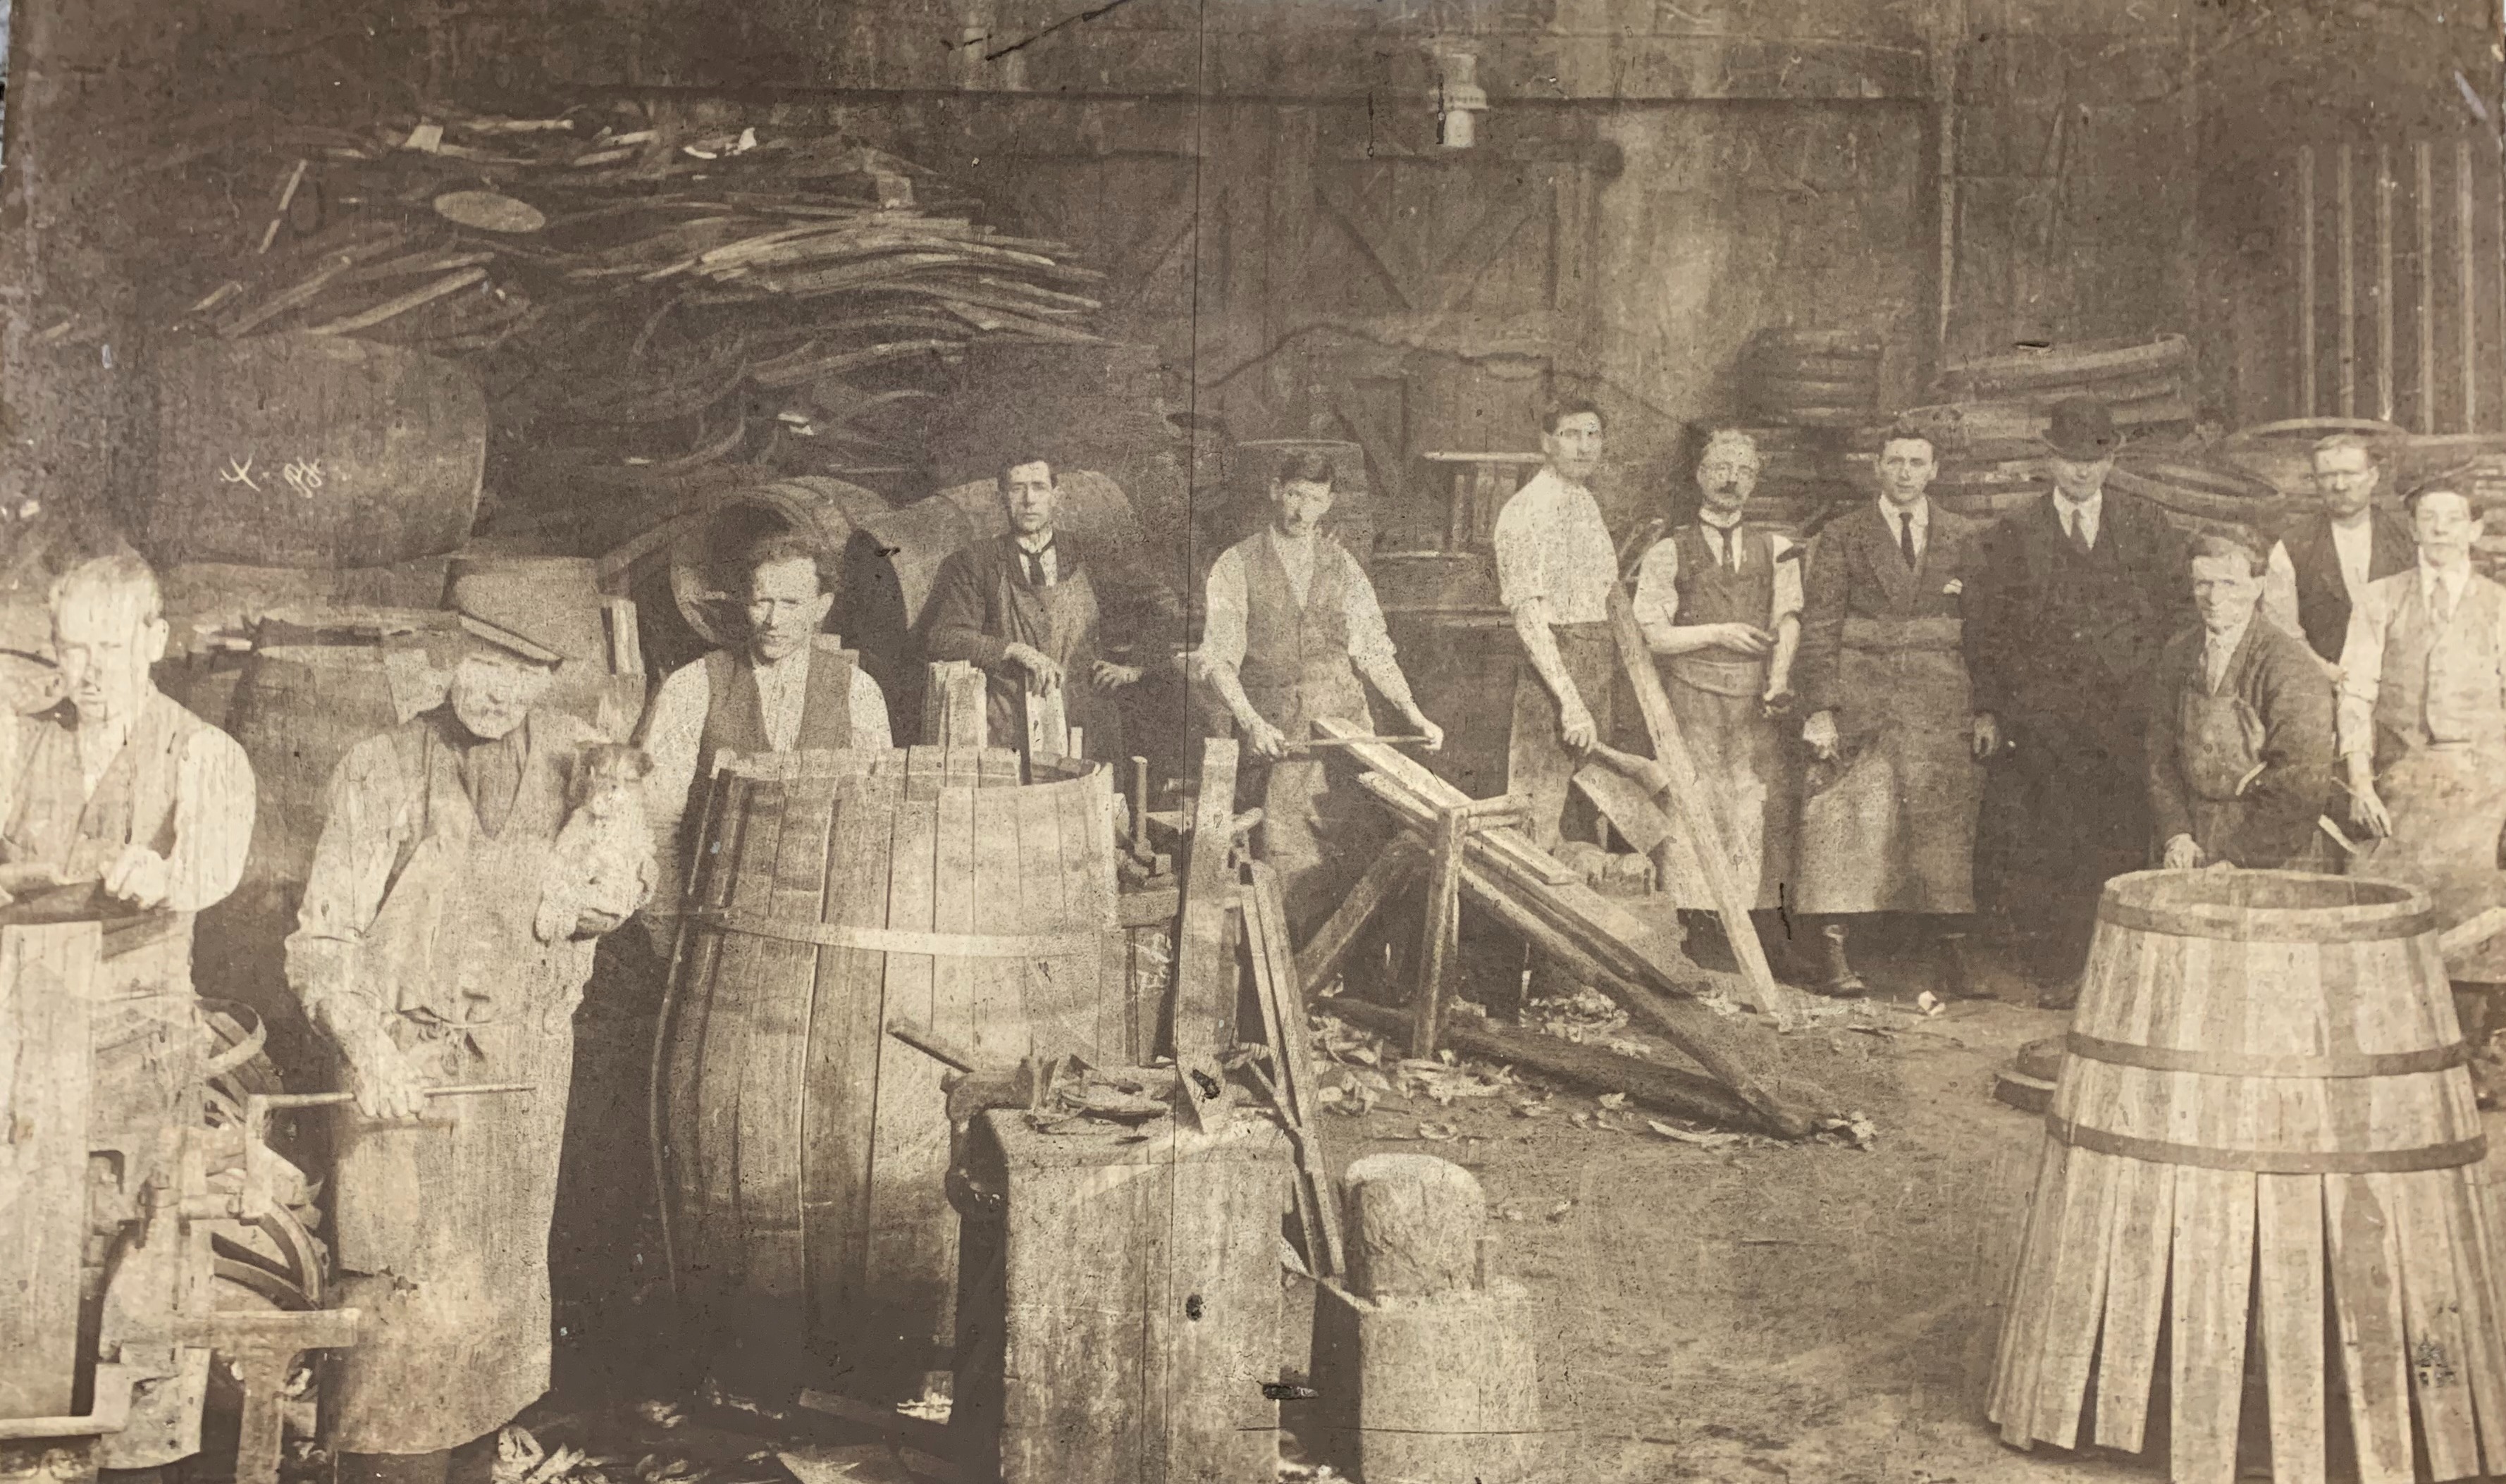 A historical photo of a group of men posing for the camera surrounded by barrels who appear to work in a whiskey distillery.